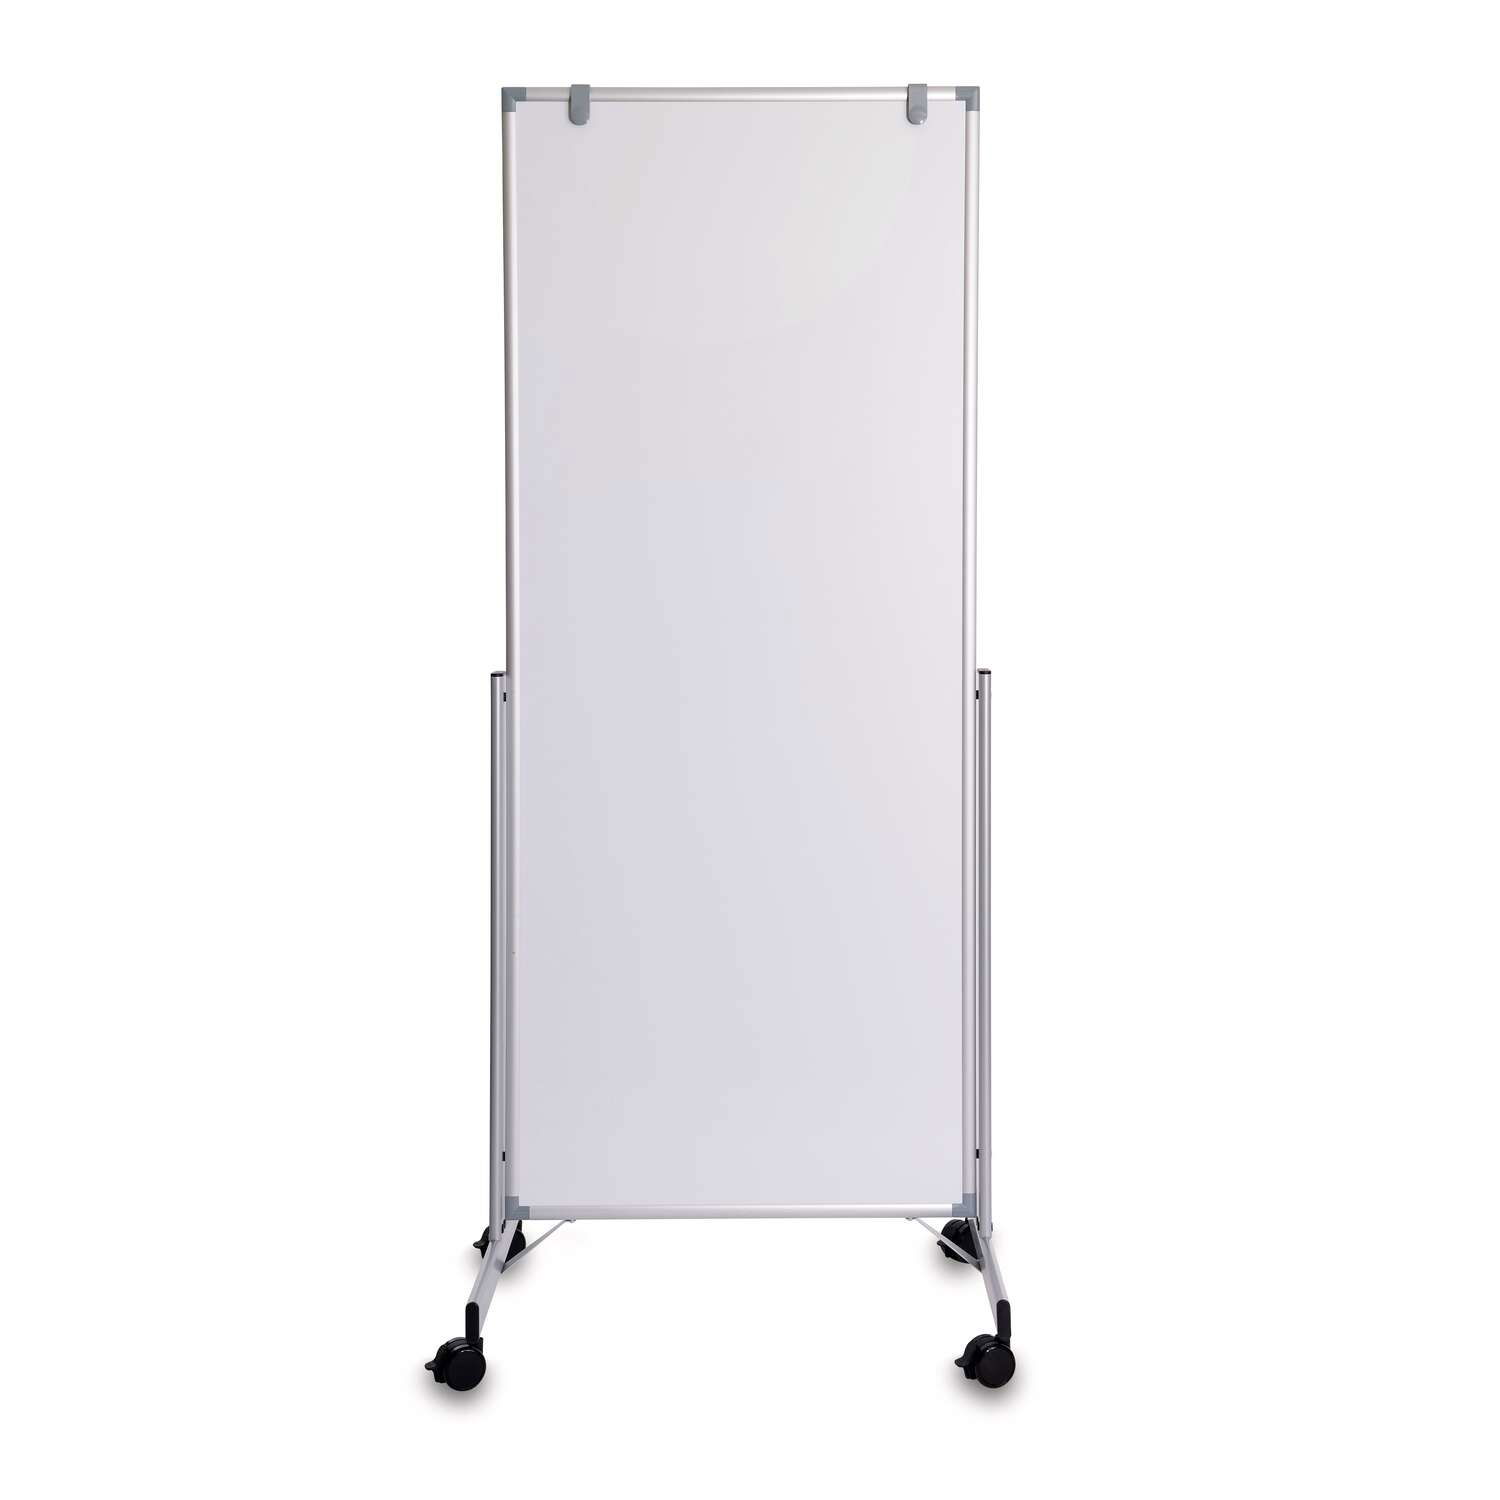 Whiteboard mobil MAULpro easy2move 75x180 cm